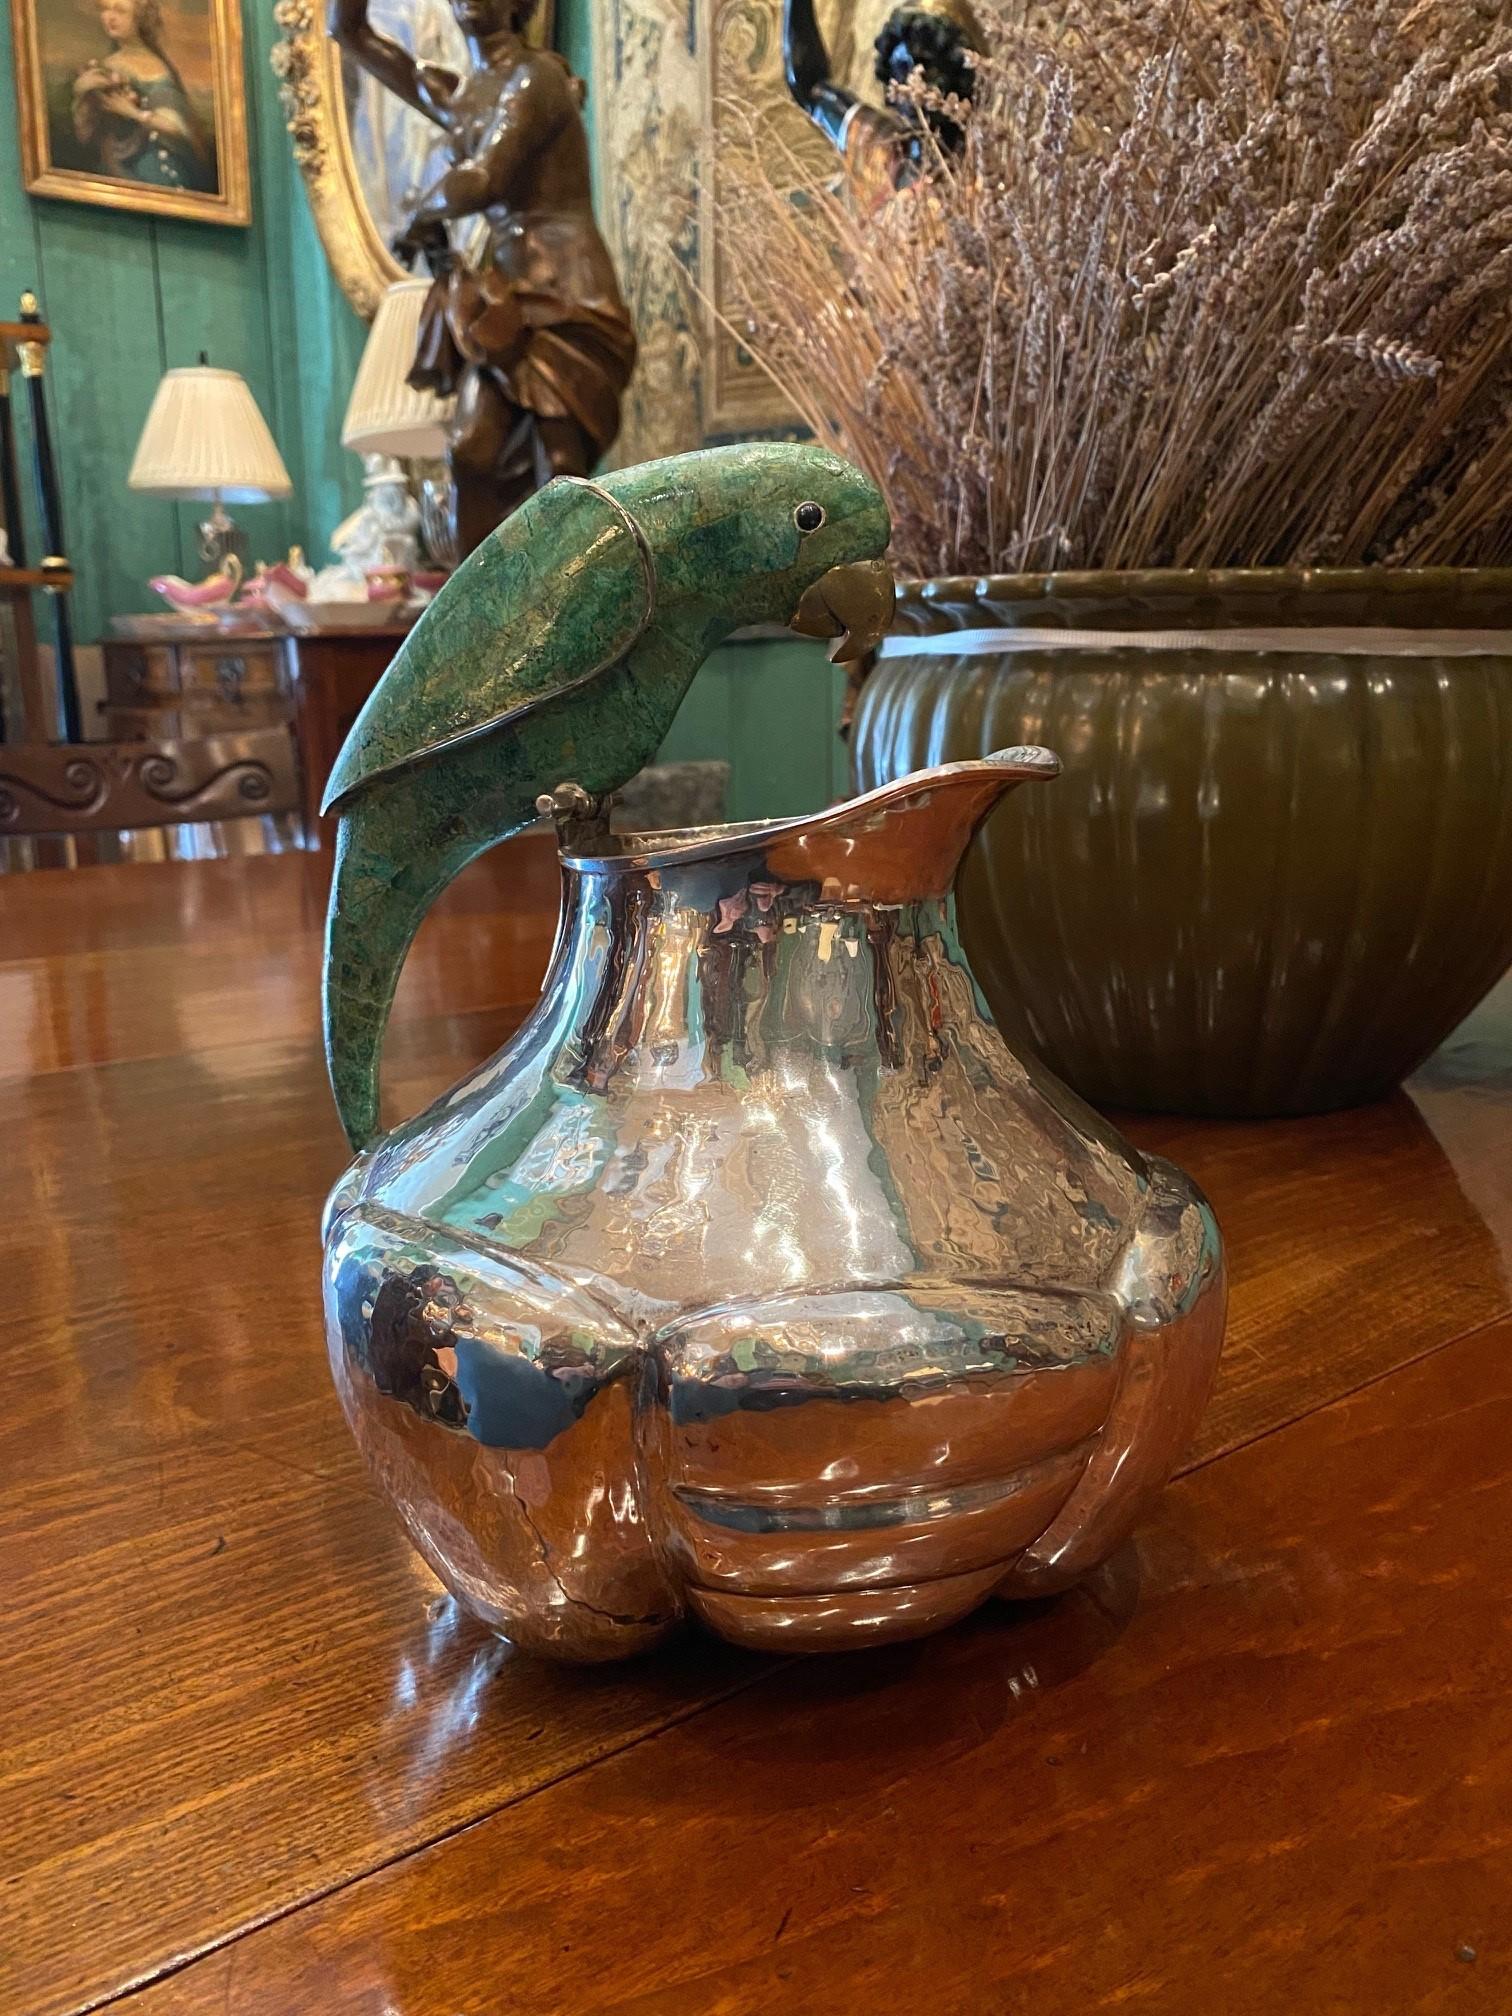 Large centerpiece serving silver - plated hand hammered lobed pitcher bowl from the renowned Taxco Mexico workshop of the Great Emilia Castillo. Emilia descends from a fine family tree of renowned Taxco metal artisans and jewelers . Pitcher flanked